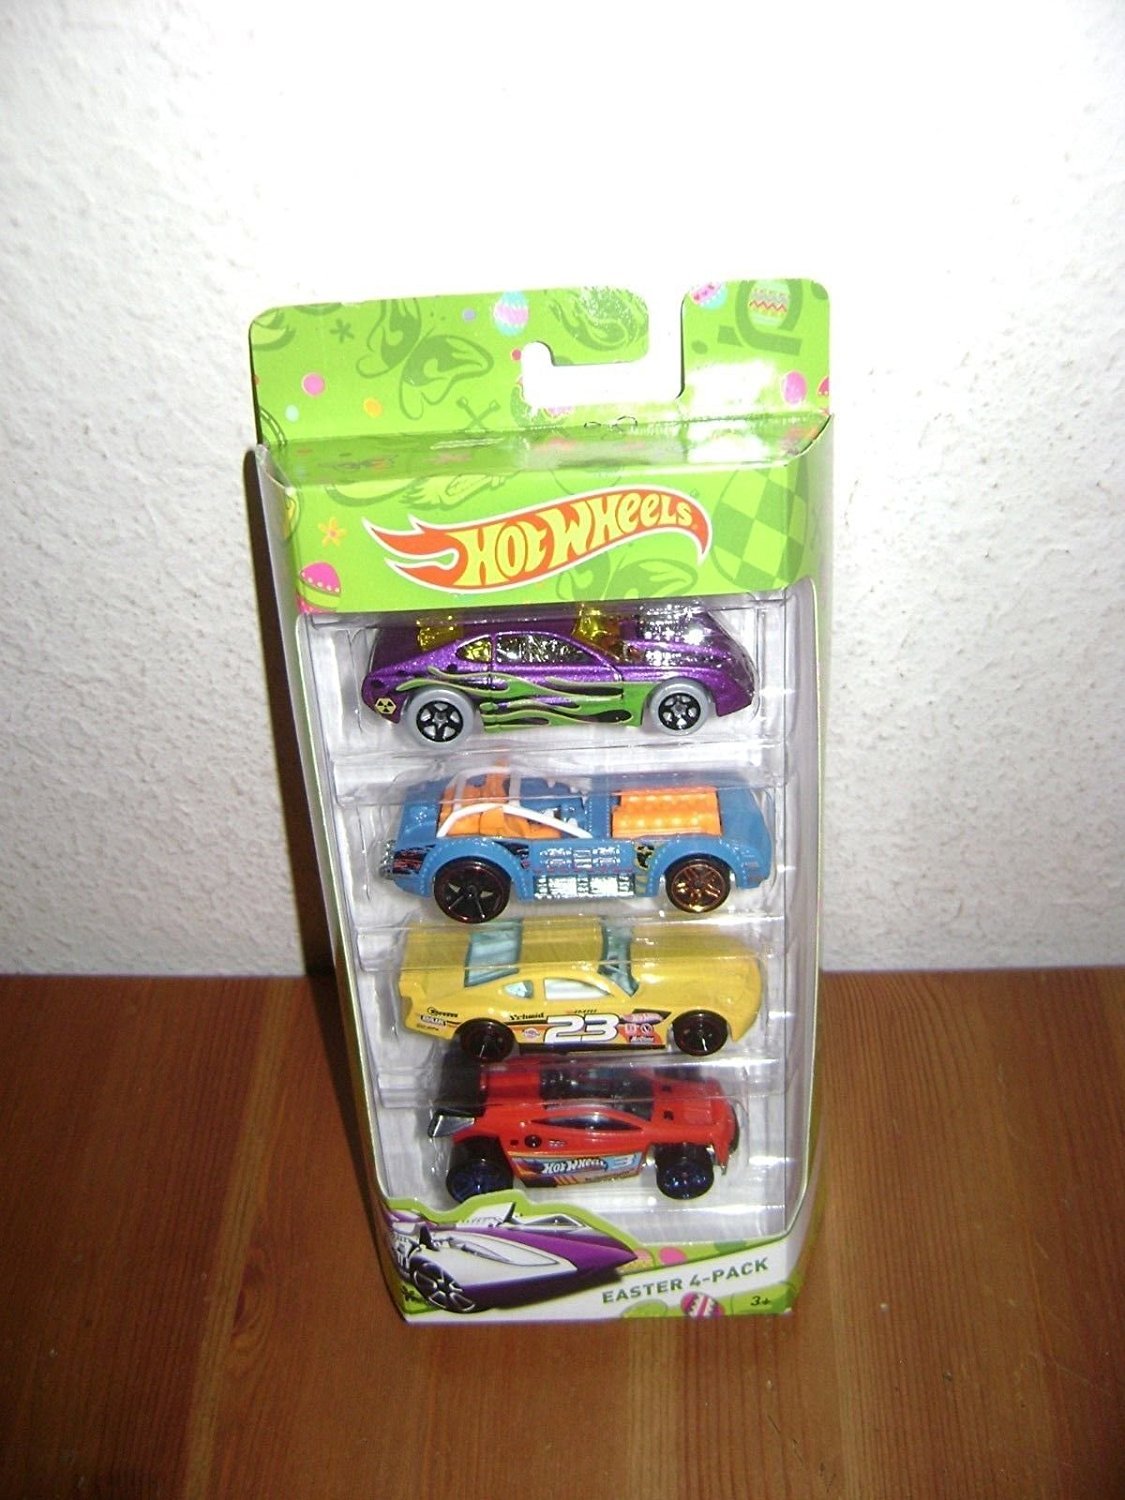 Hot Wheels Easter 4 Pack of Cars New in Package Target 2015